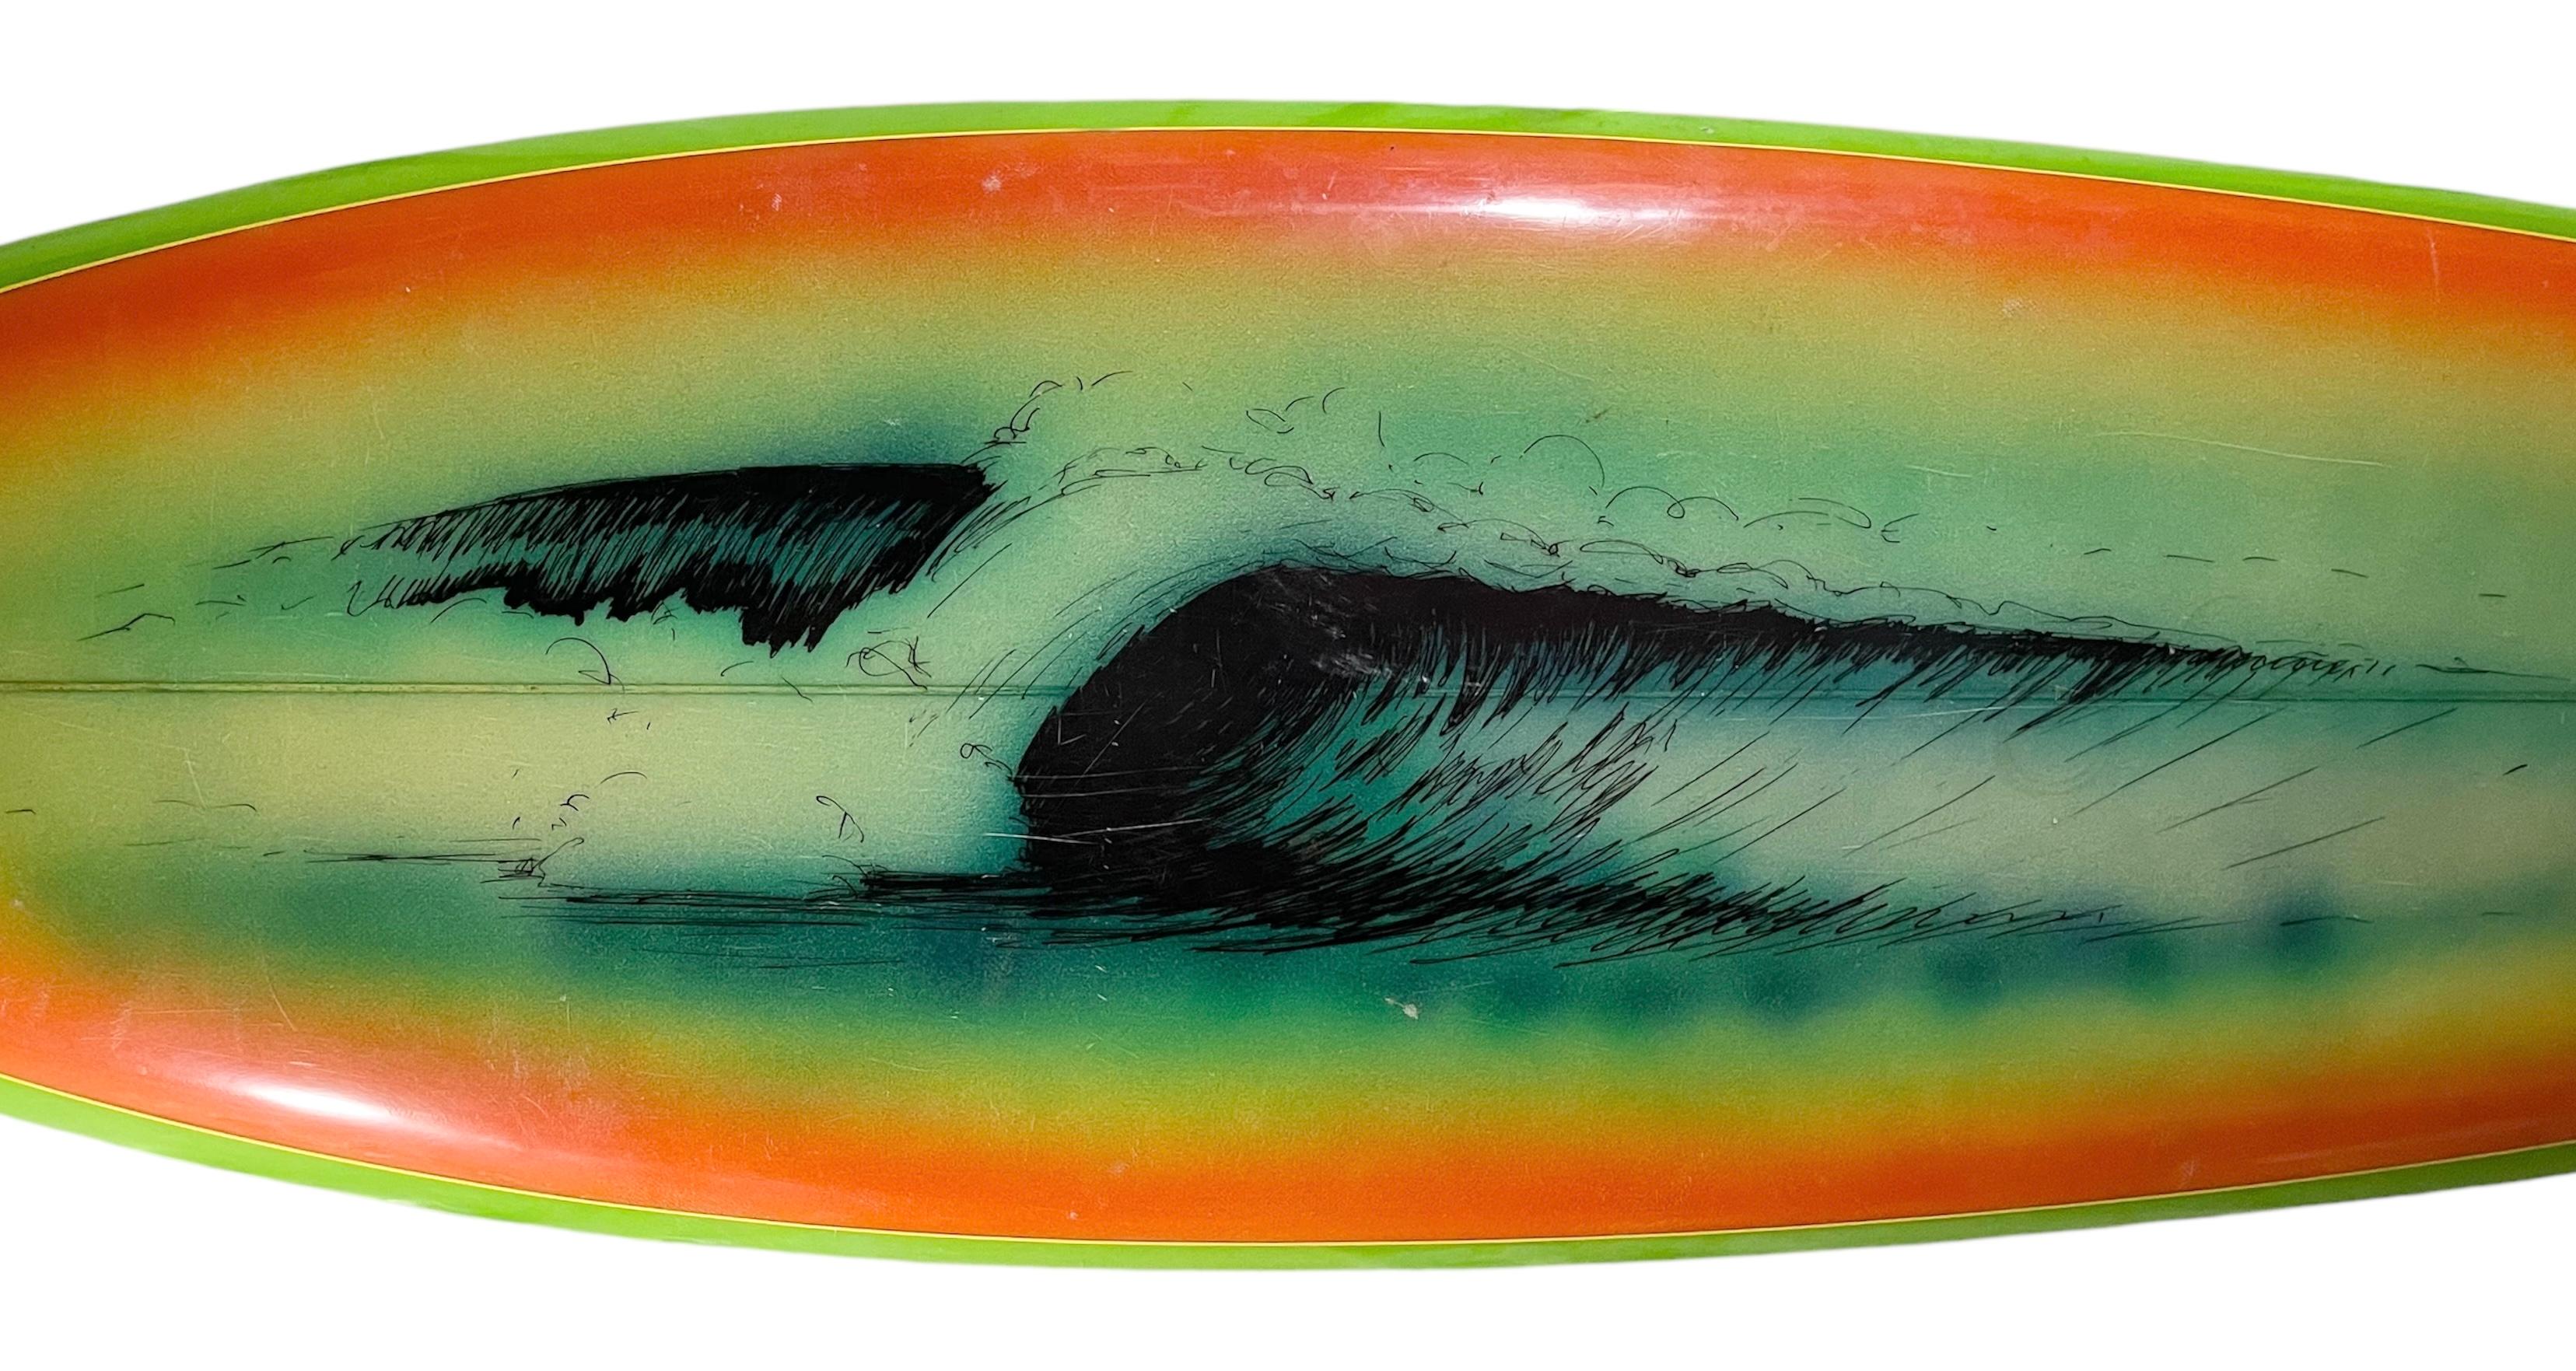 American 1970s Vintage Ocean Crystal Wave Mural Surfboard Shaped by Clyde Beatty Jr. For Sale